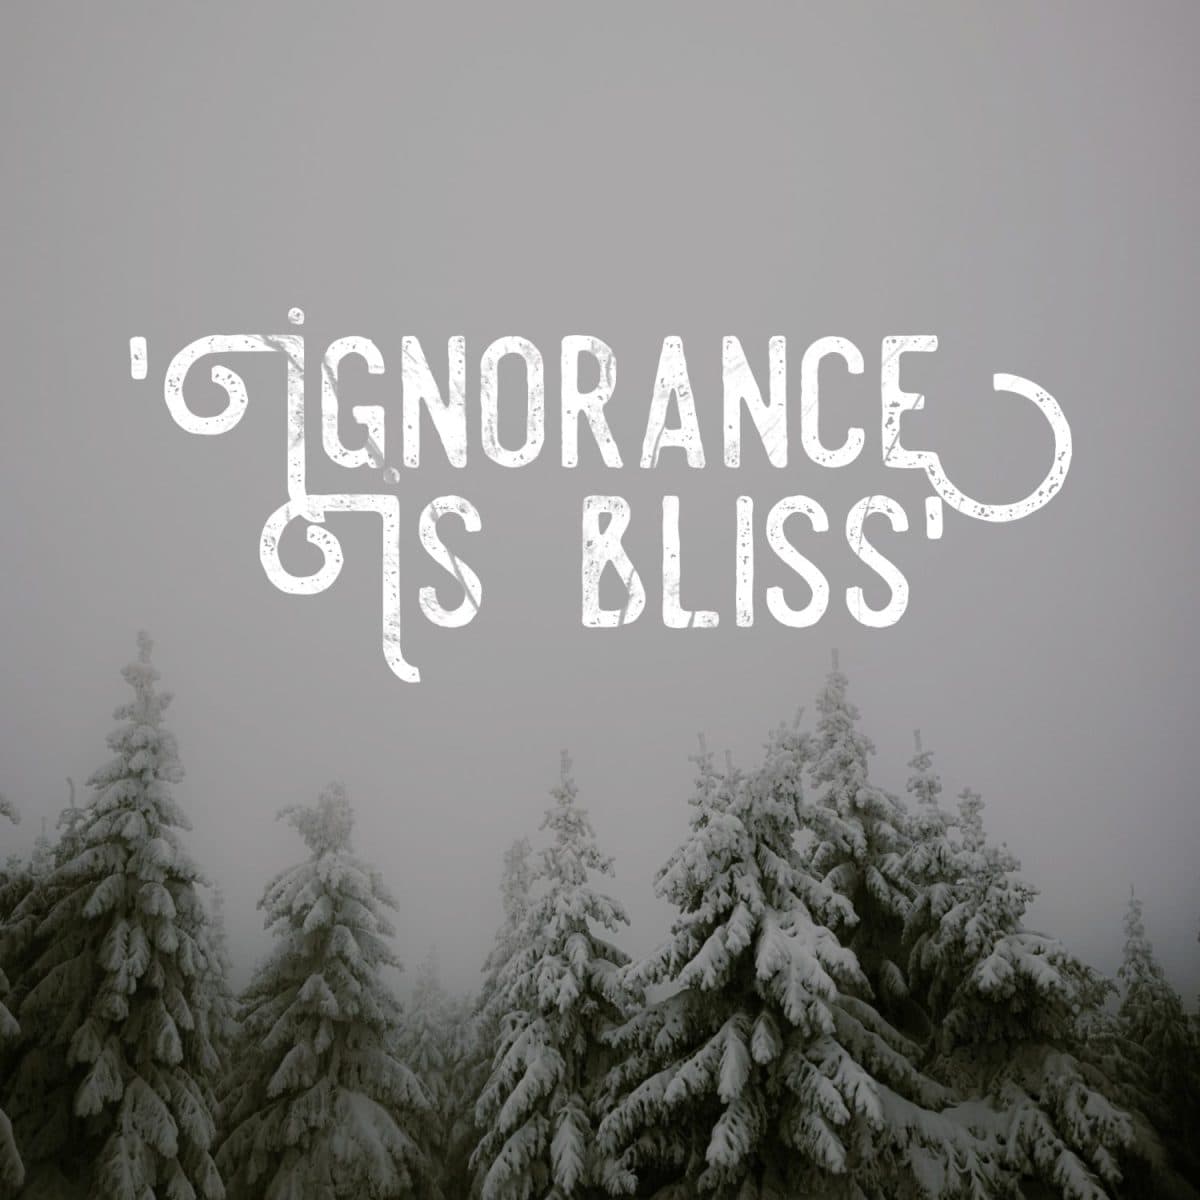 'Ignorance is bliss'. A idiom, Poster.